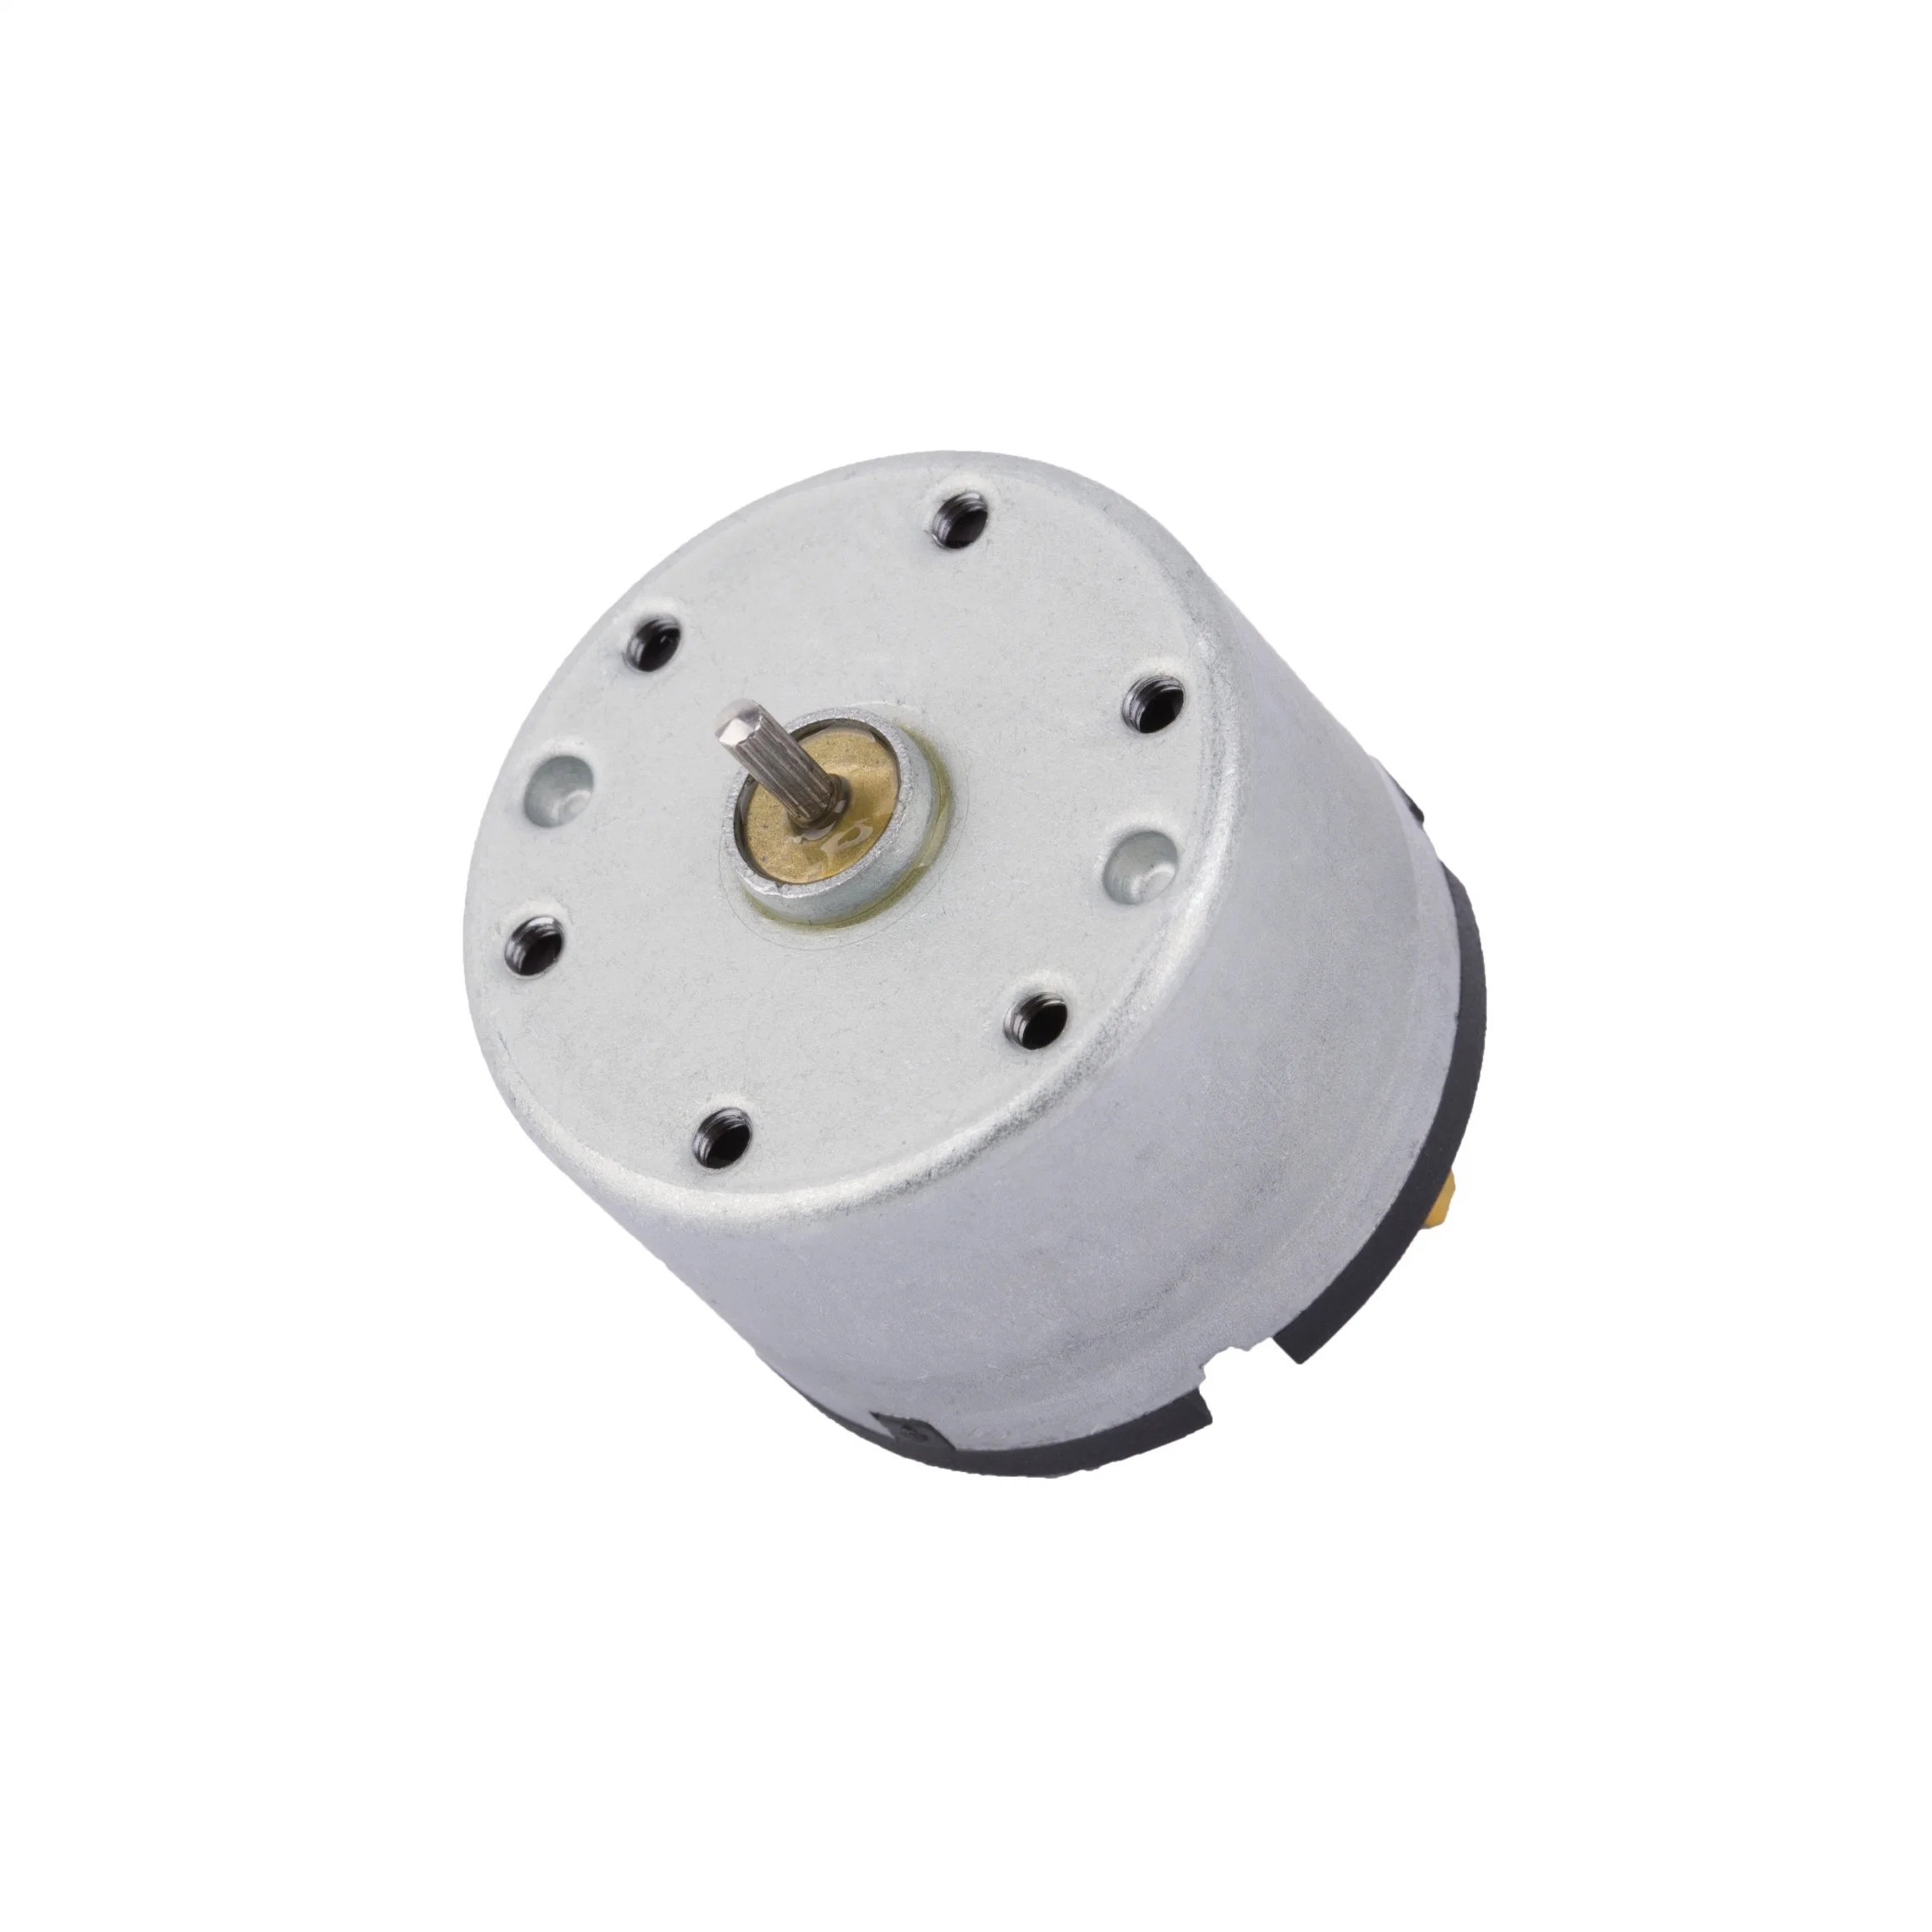 DC Motors Electrical Motors with 24 Volt Stable Performance for Power Transmission Elevator